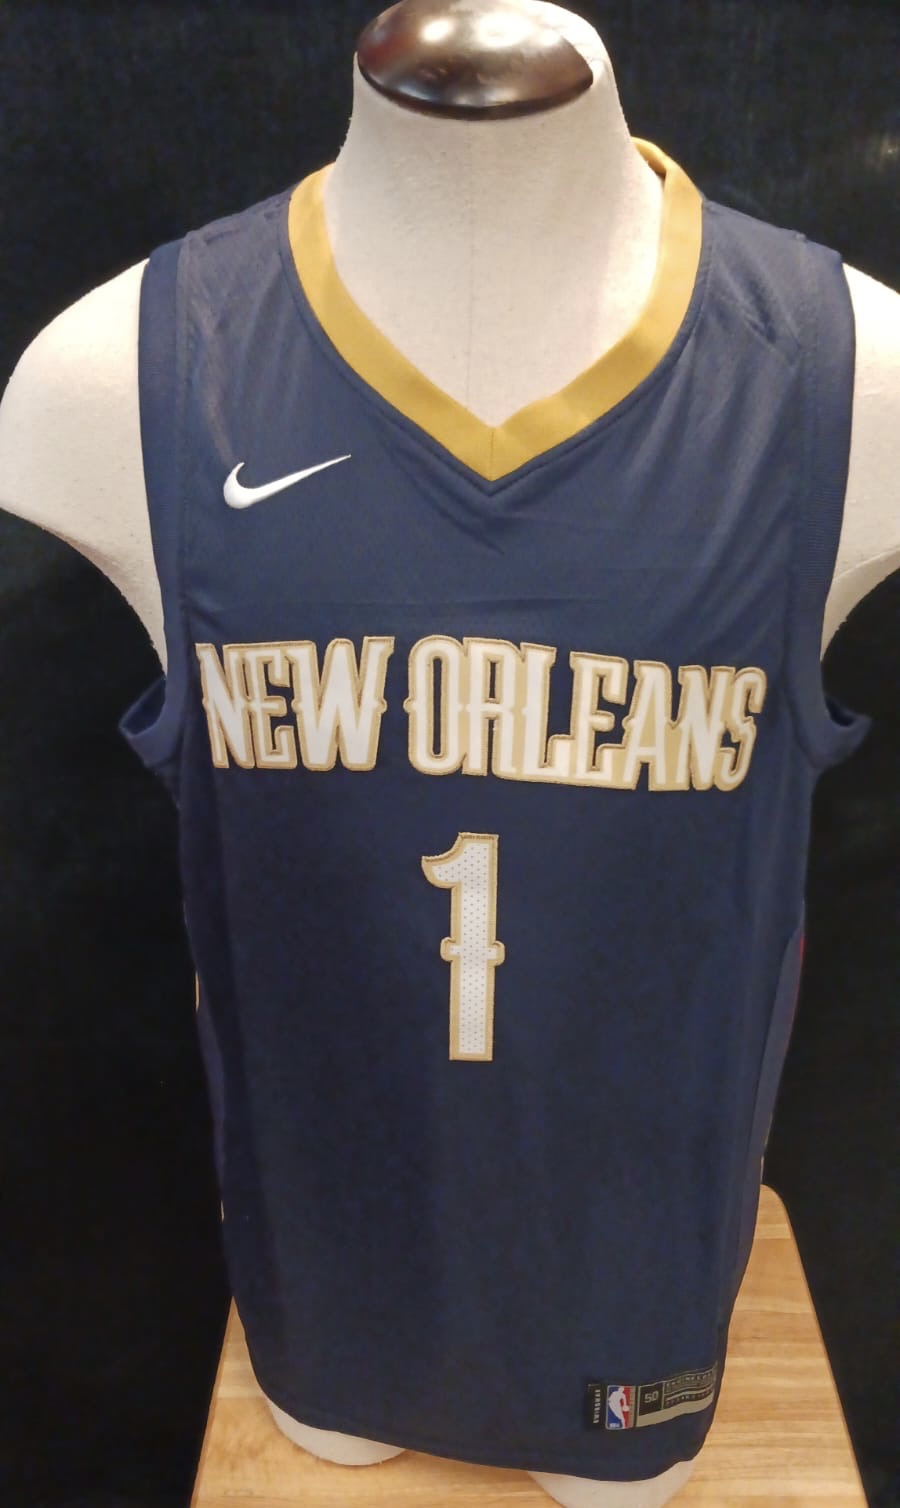 New Orleans Pelicans Apparel, New Orleans Pelicans Jerseys, New